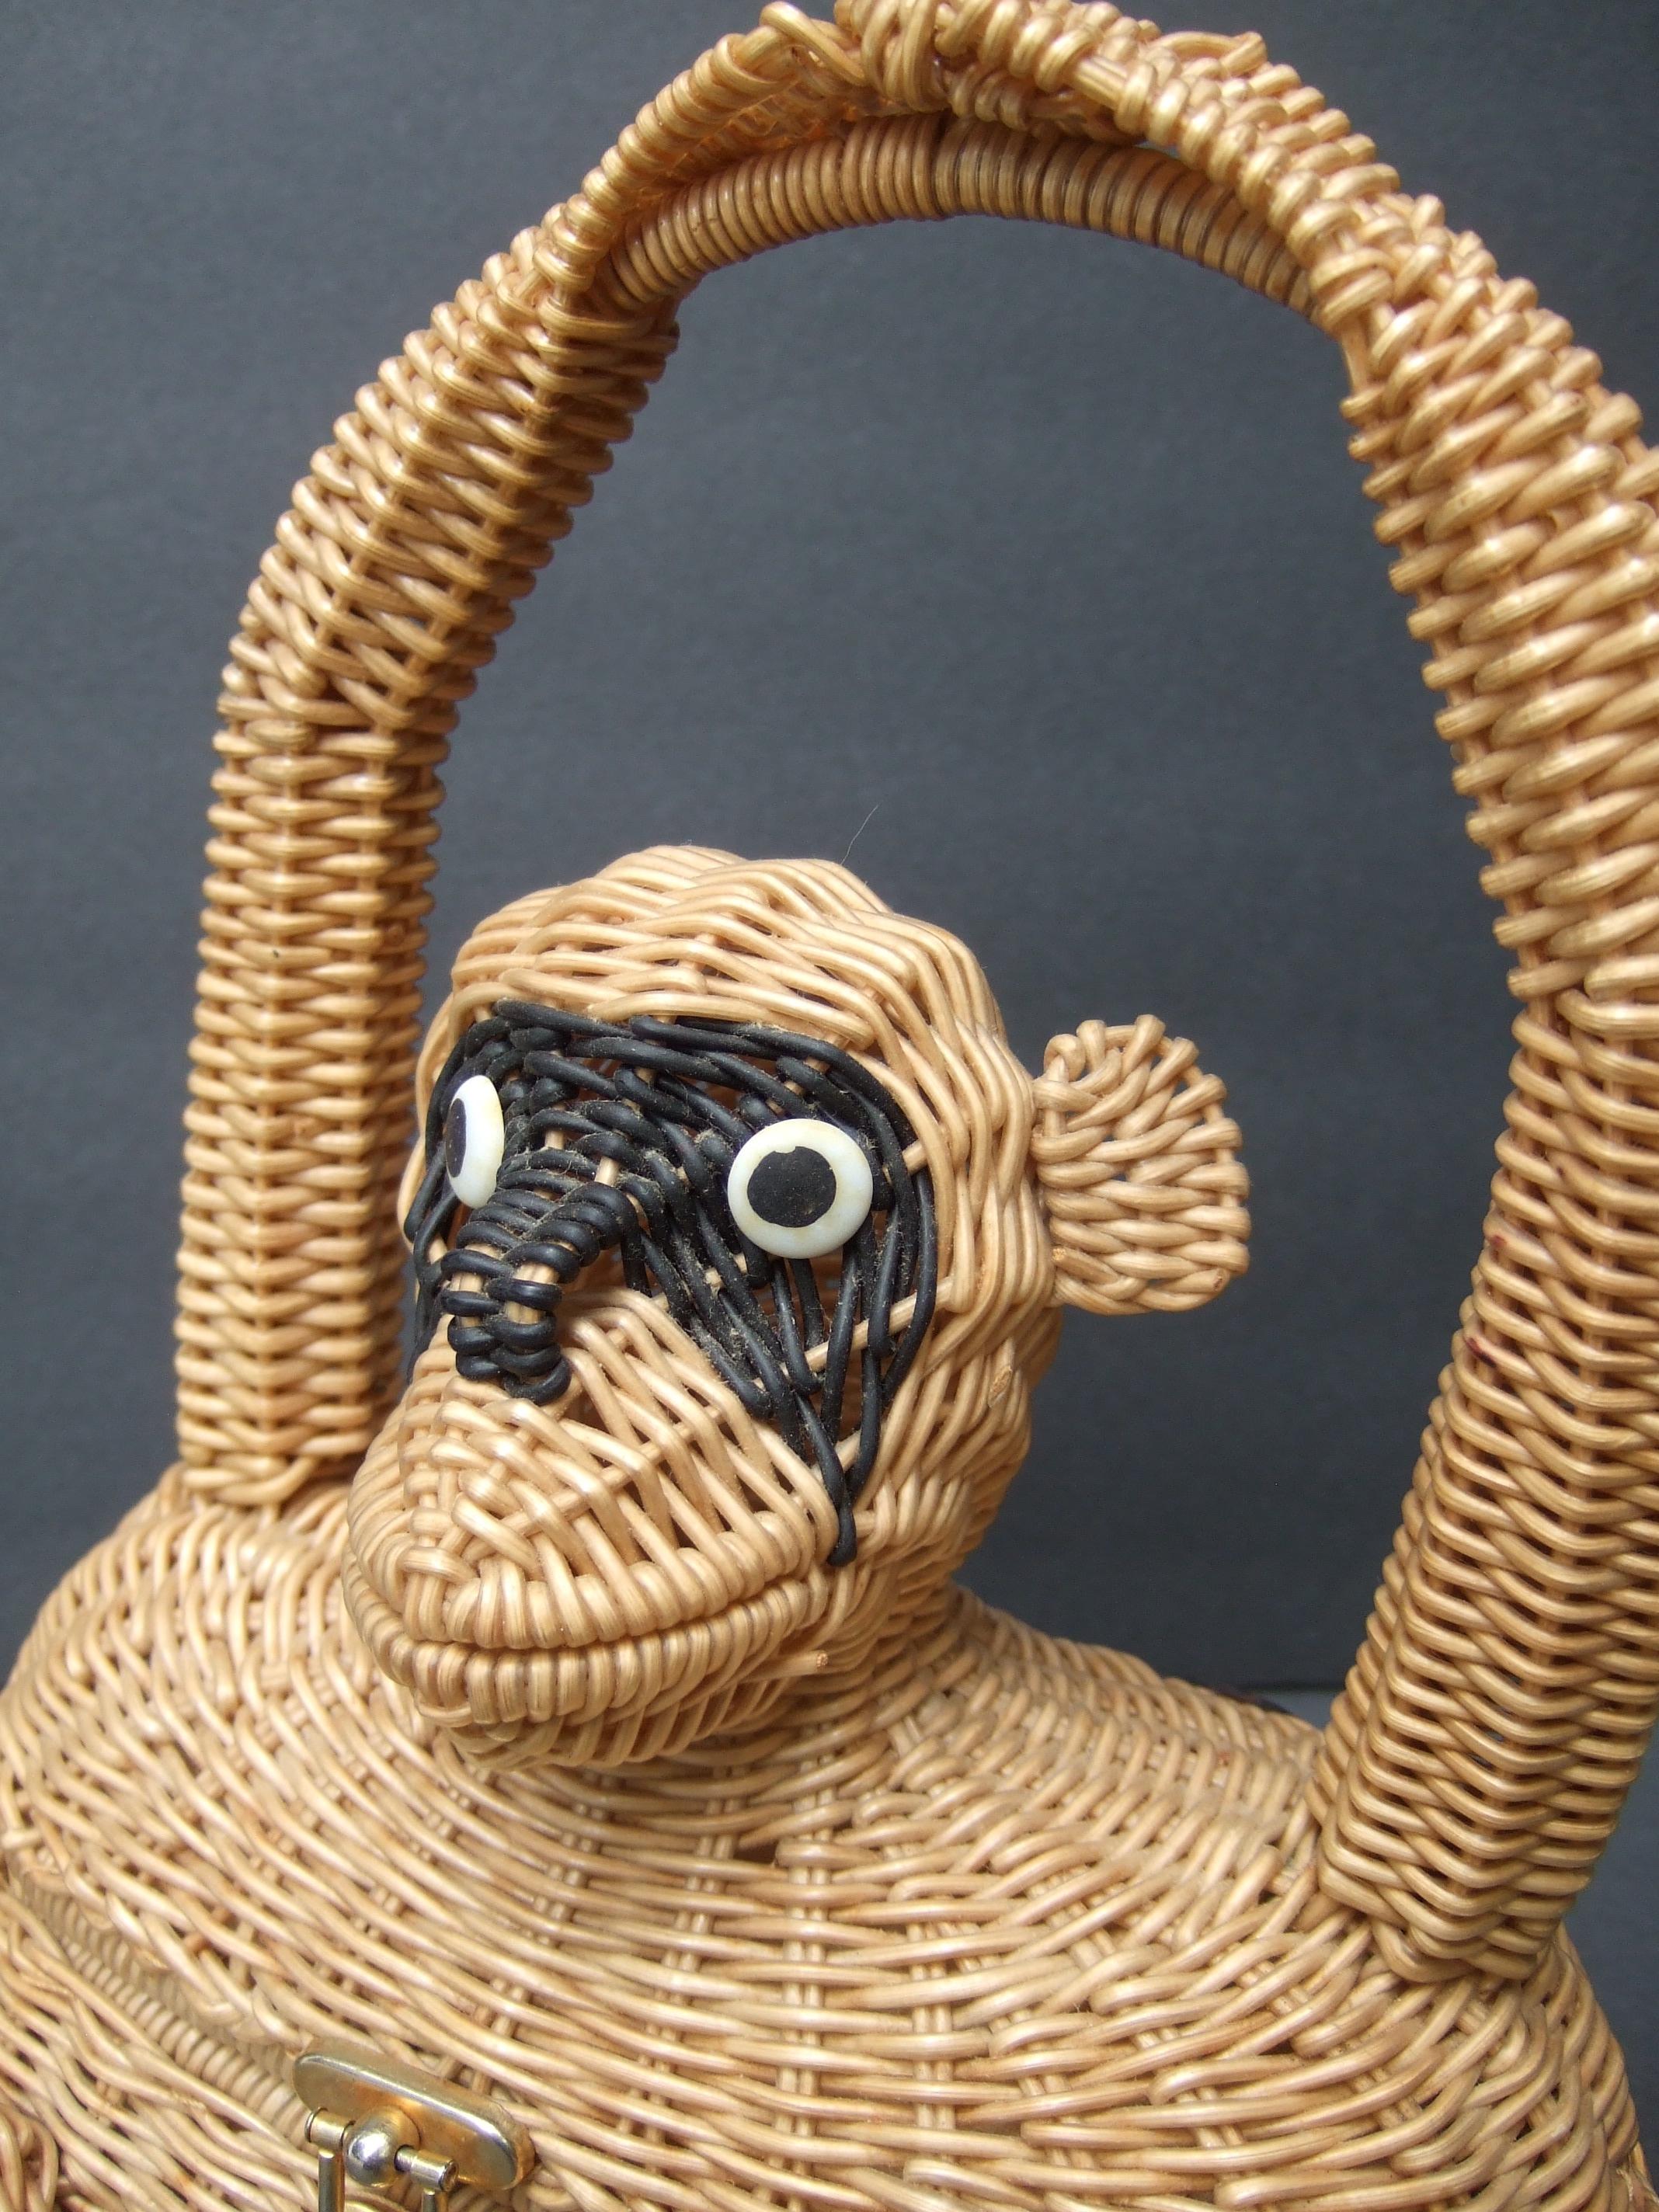 Whimsical Very Rare Wicker Monkey Handbag Designed by Marcus Brothers c 1960 For Sale 3